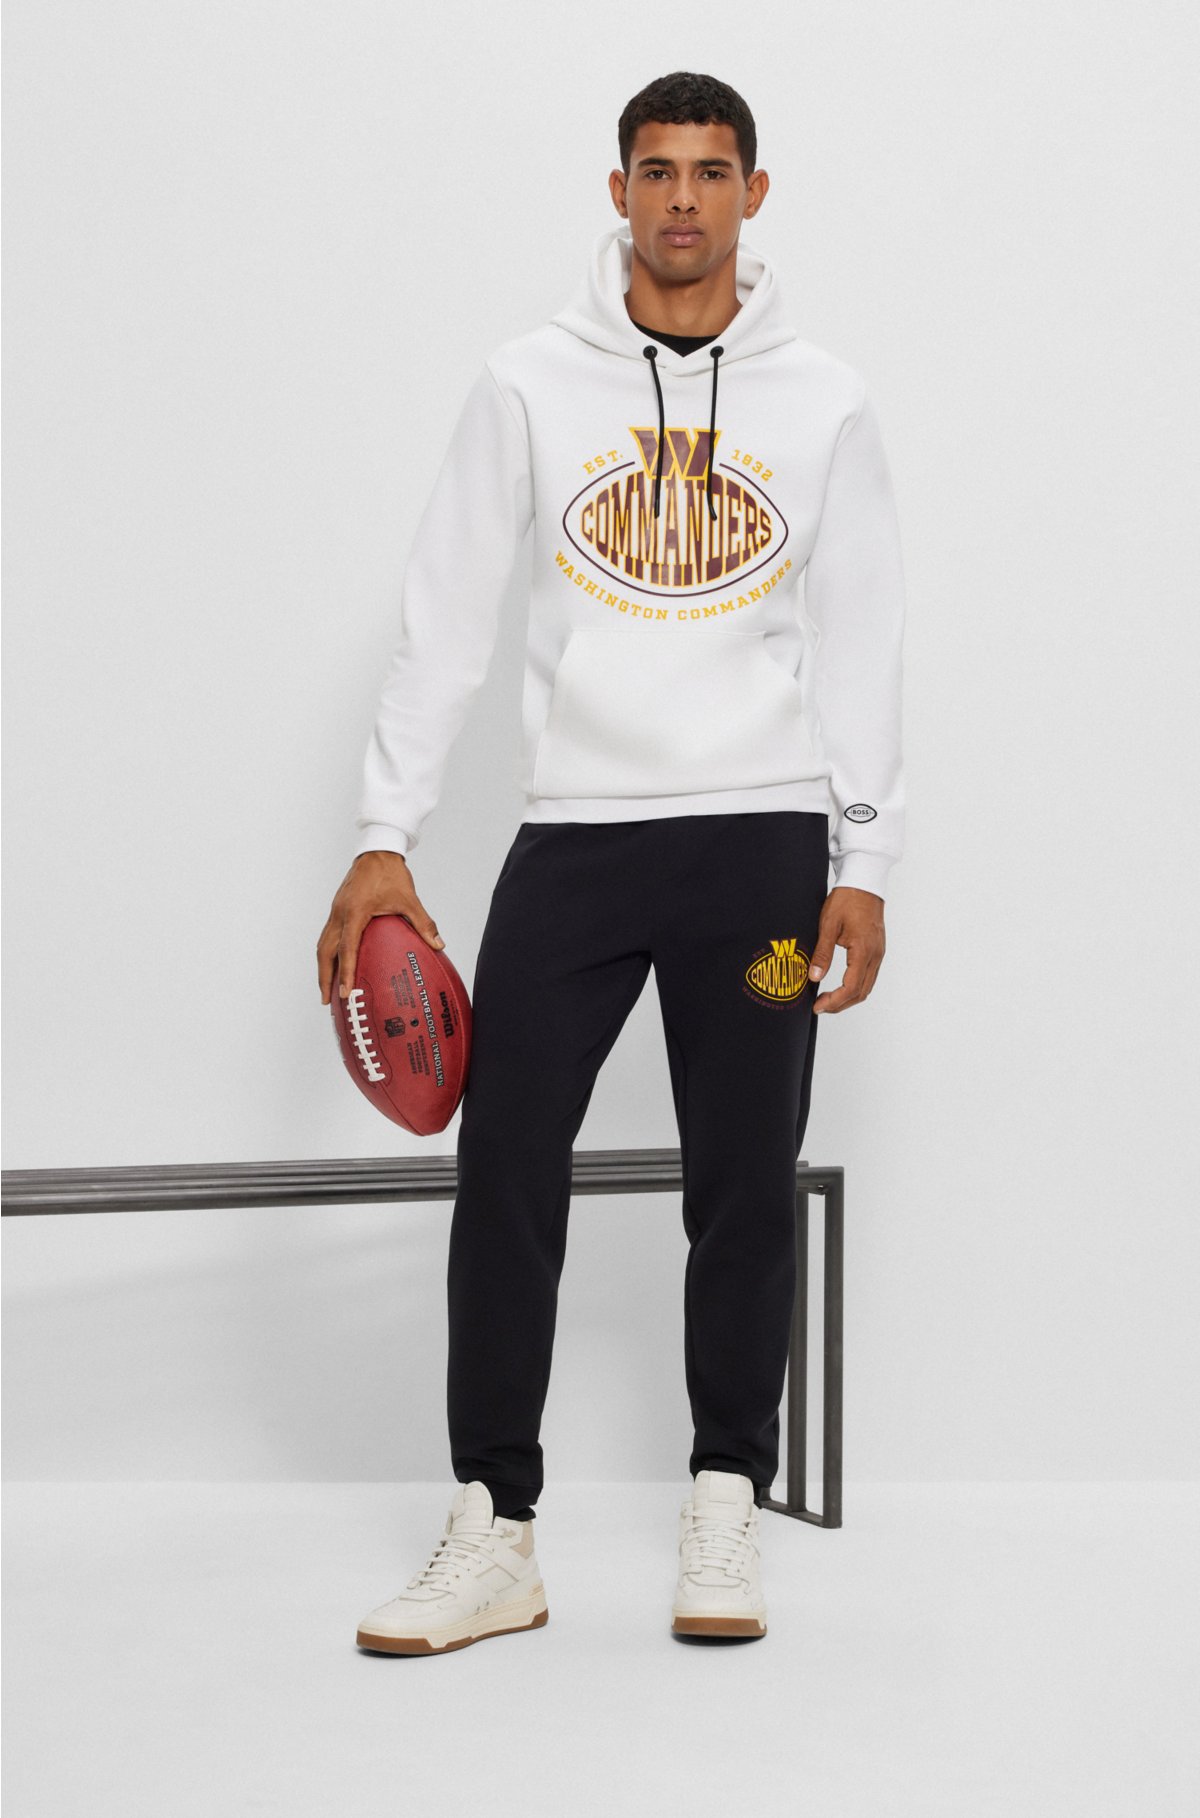  BOSS x NFL cotton-blend hoodie with collaborative branding, Commanders